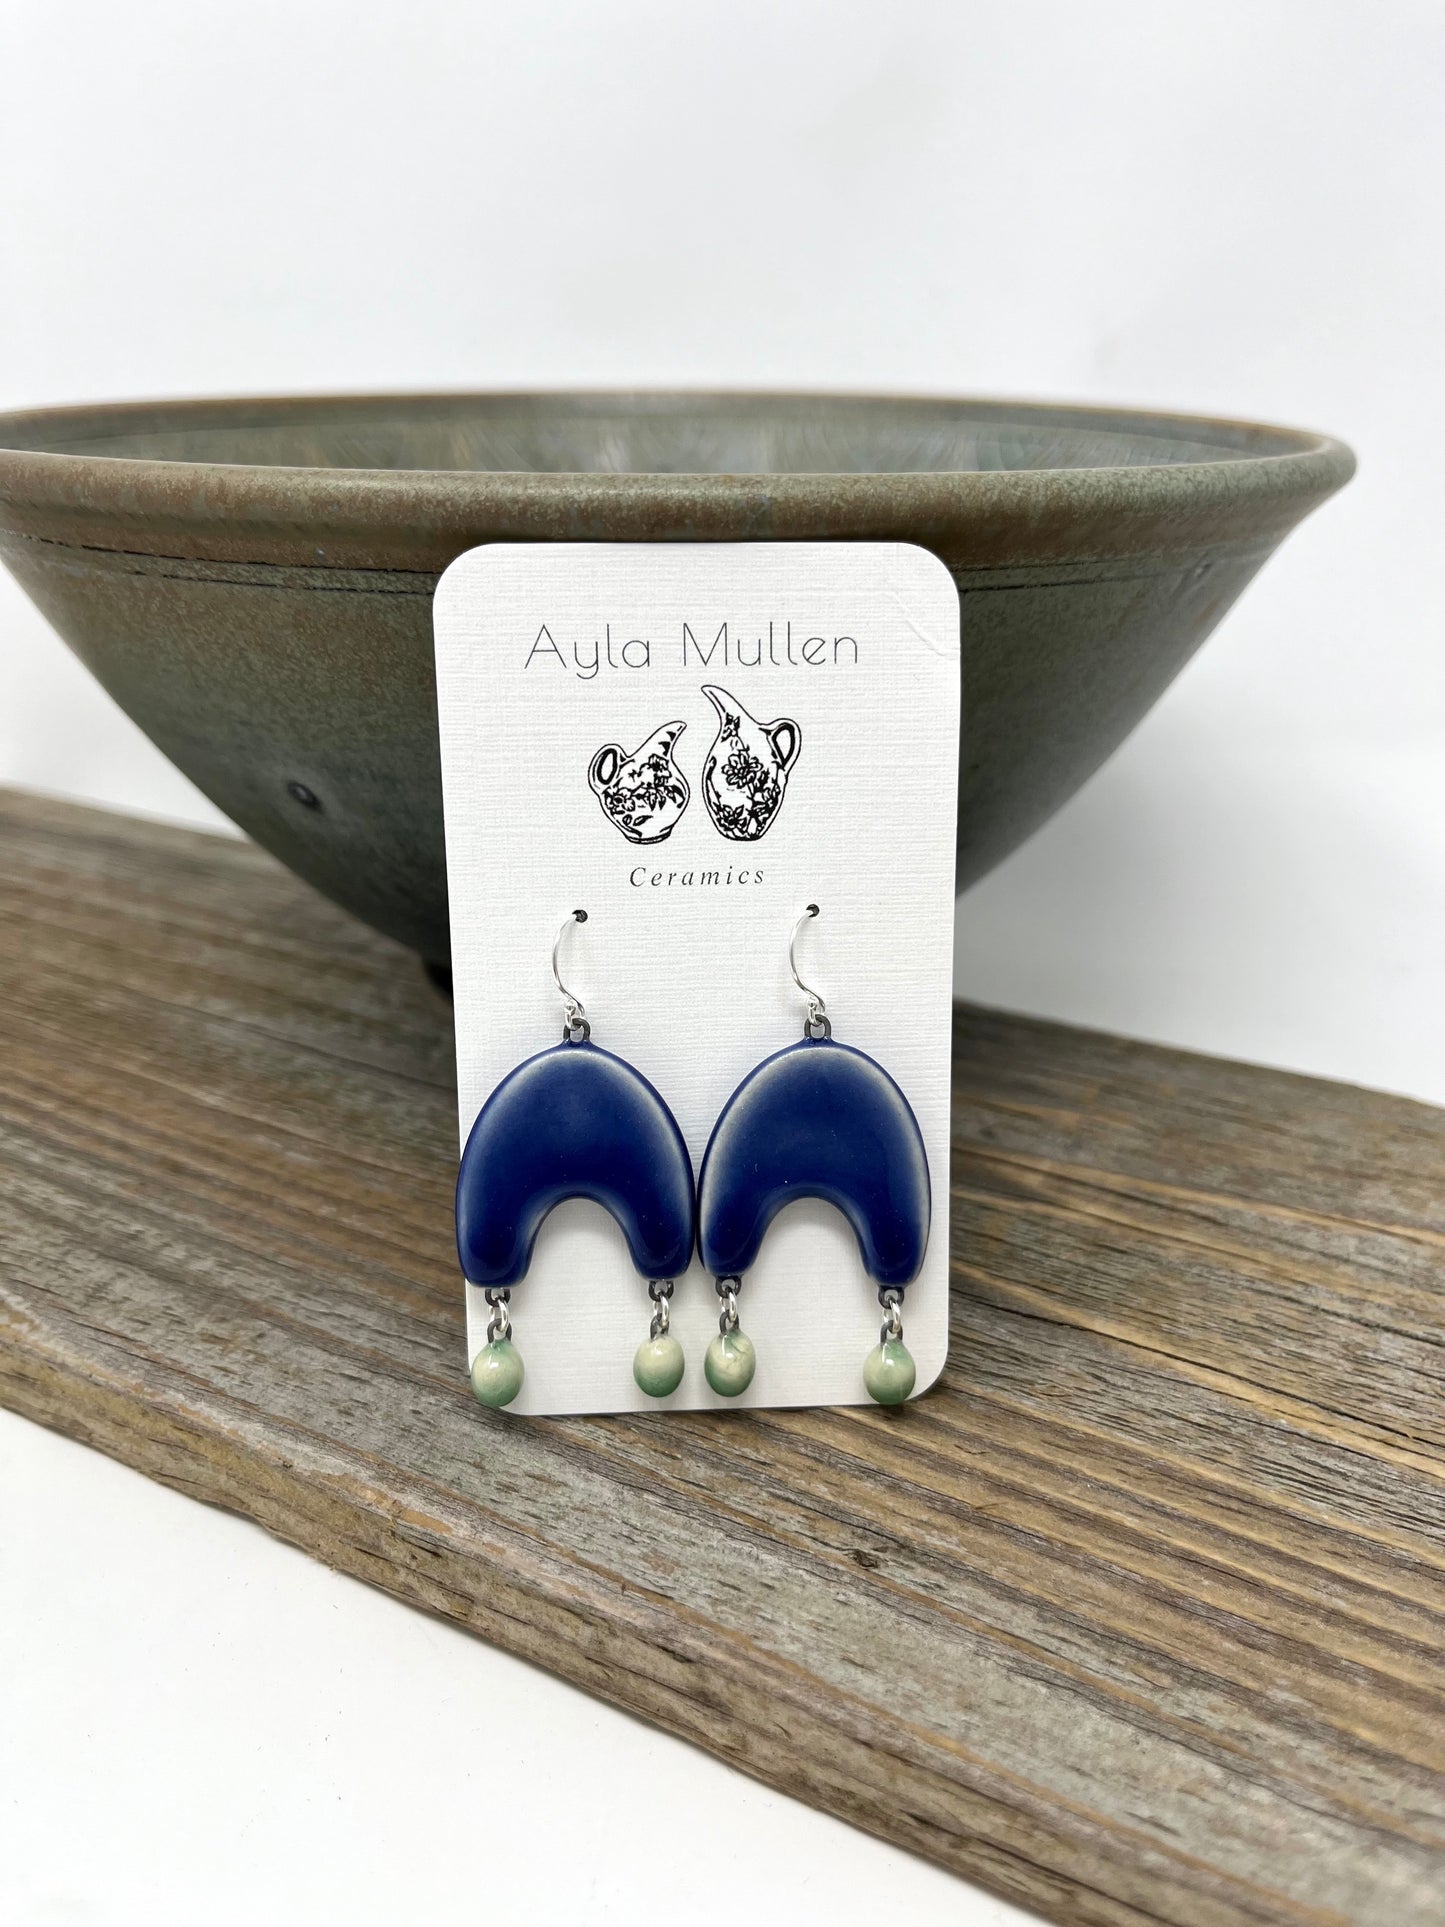 Large Cobalt Arch Earrings with Green Dangles, Sterling Silver